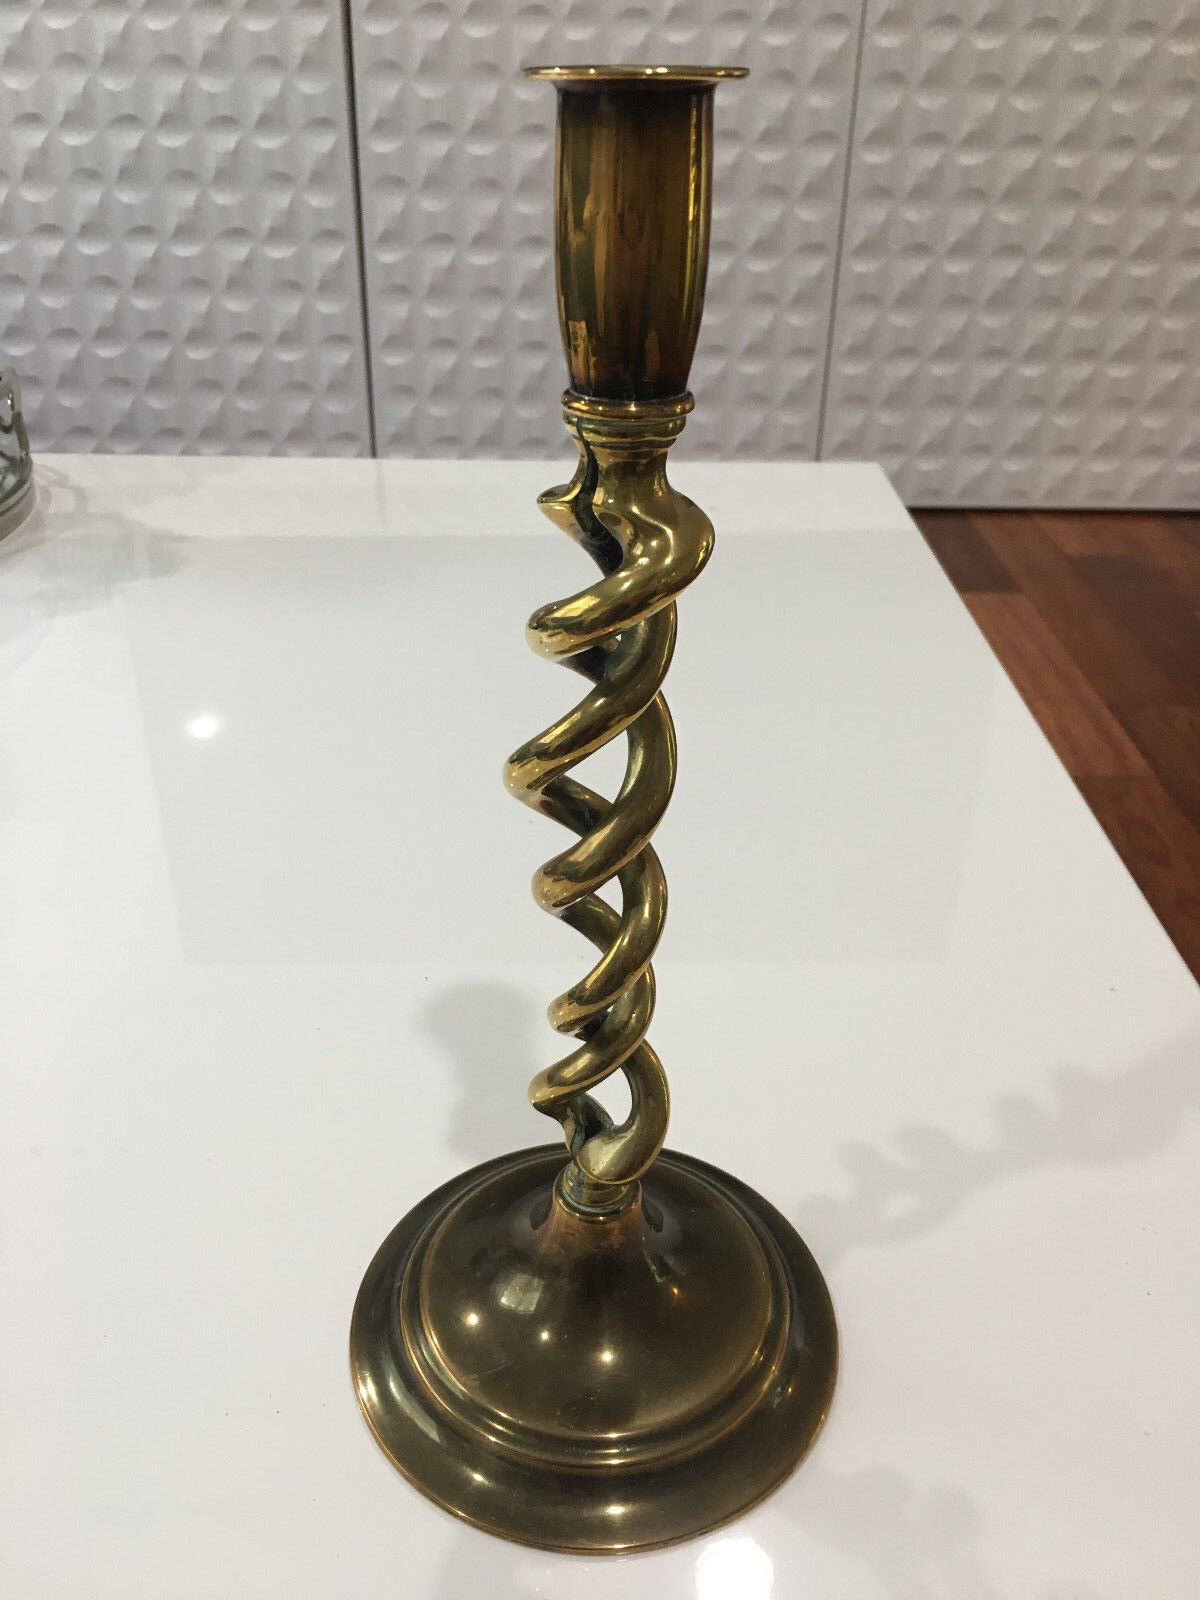 Antique 19th Century or Earlier Brass Candlestick Candle Holder Unique Spiral